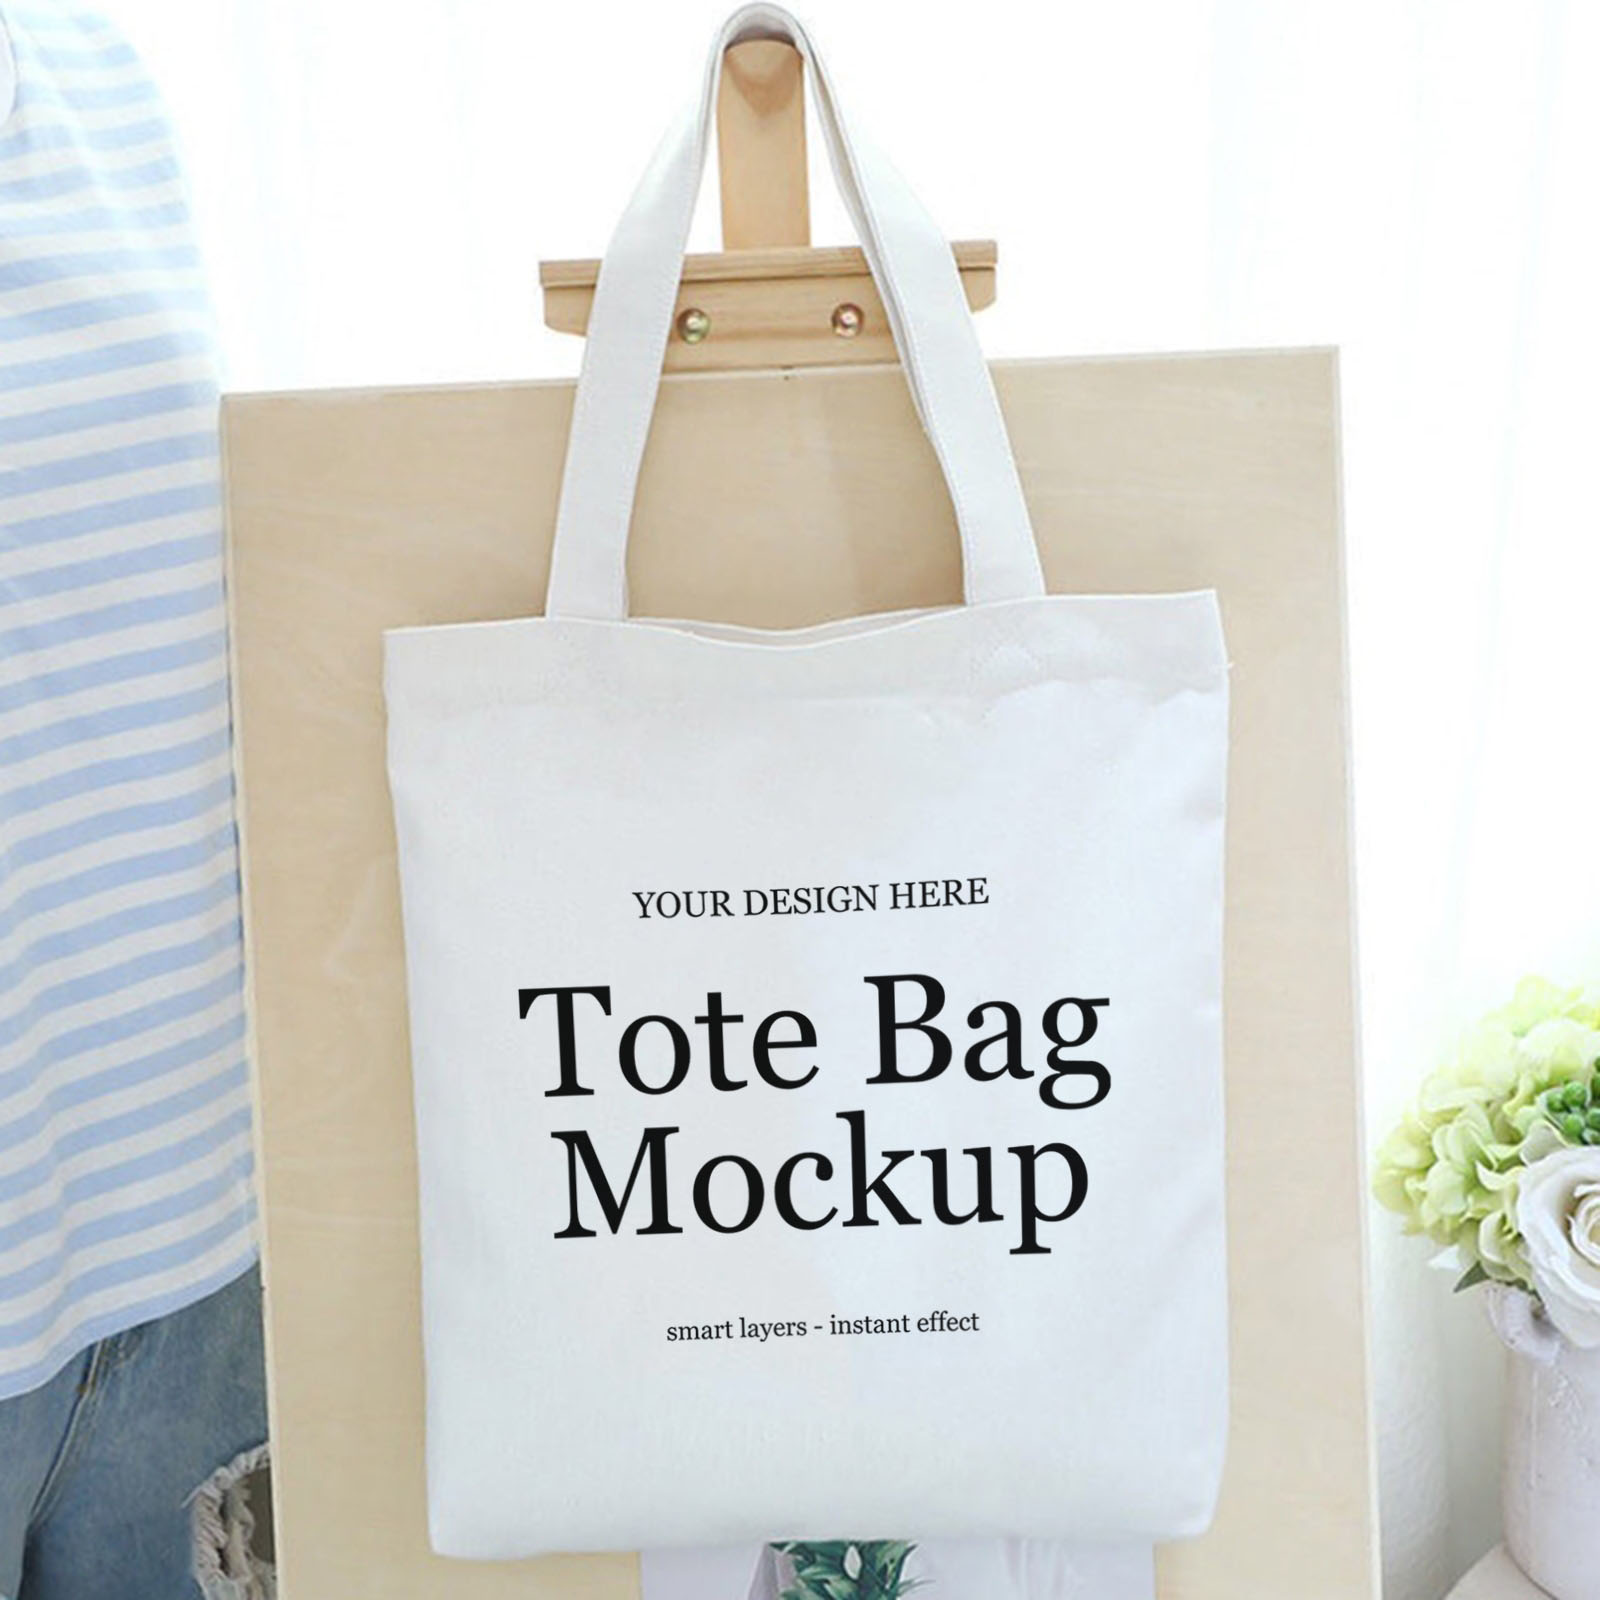 Free PSD White Canvas Tote Bag Mockup Download 55 by diosvolt on DeviantArt